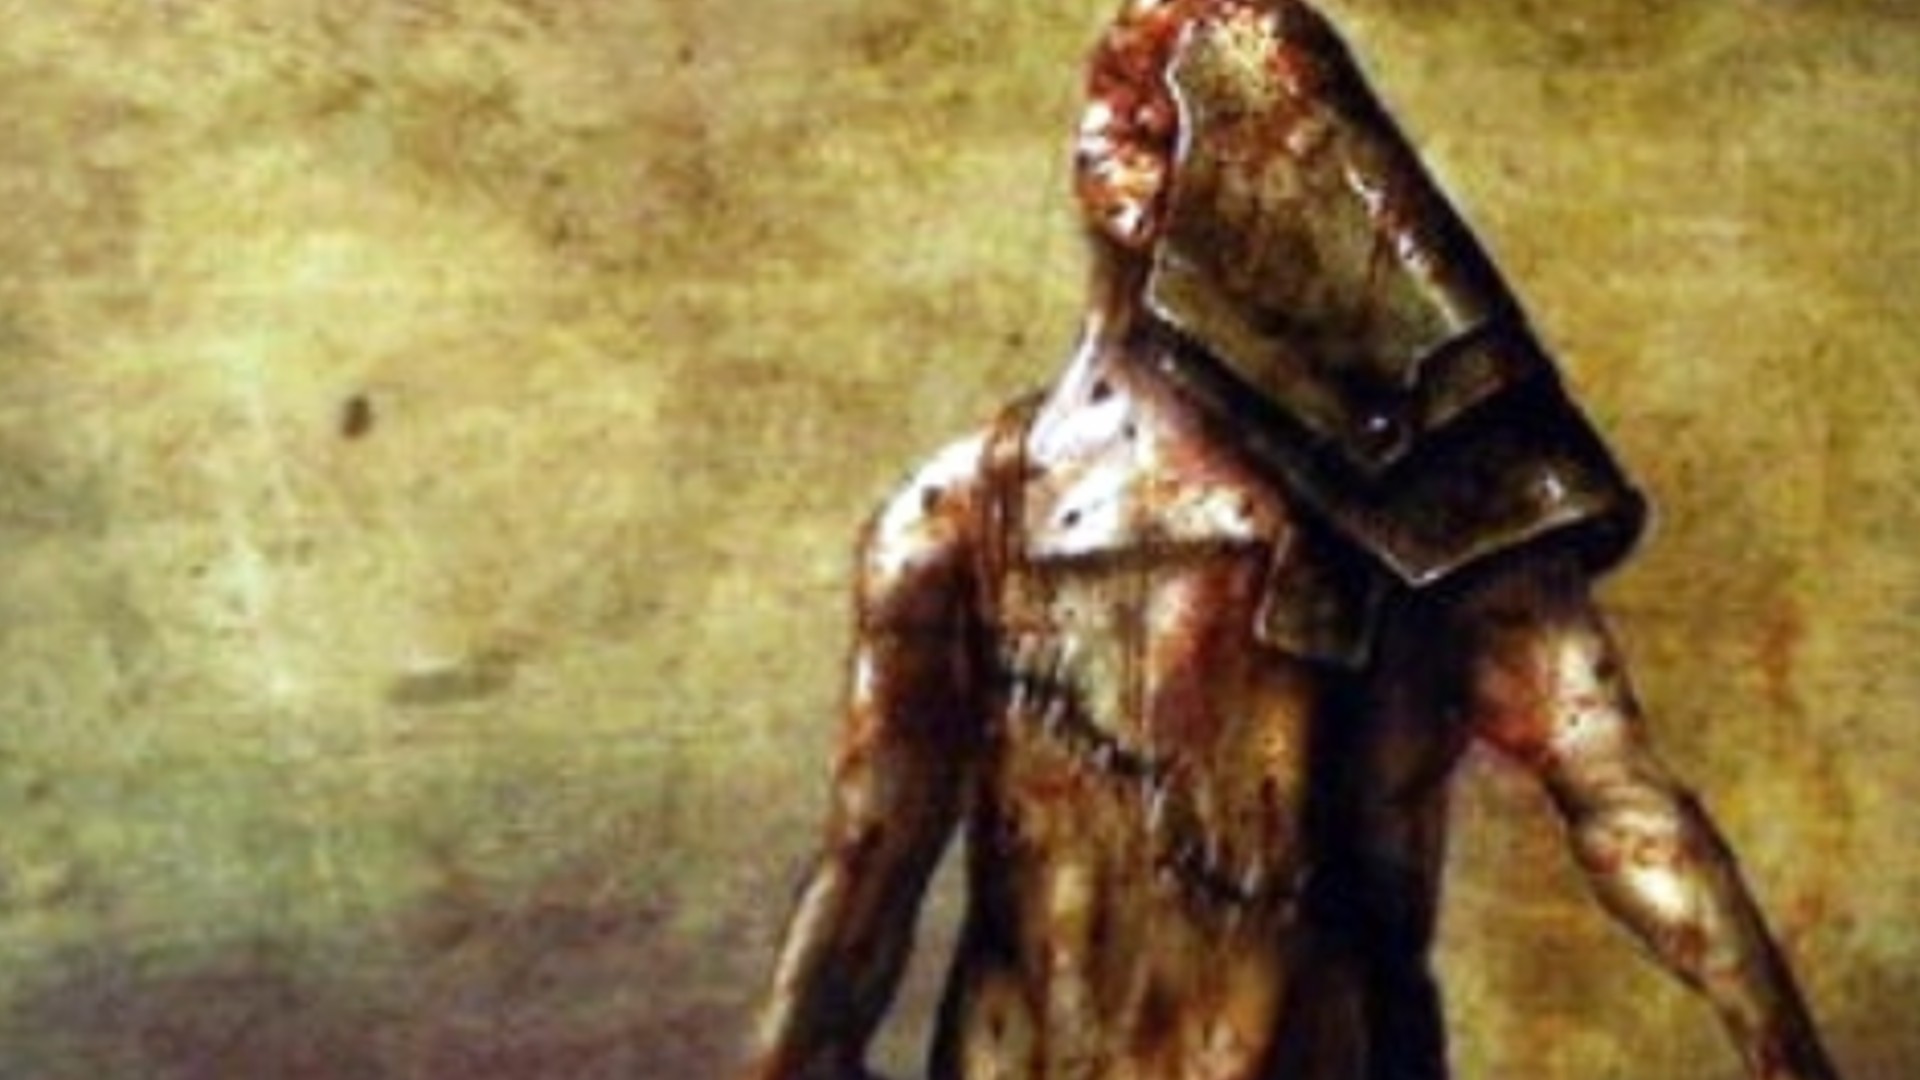 An ode to The Butcher, Silent Hill's best and most shameless Pyramid Head ripoff